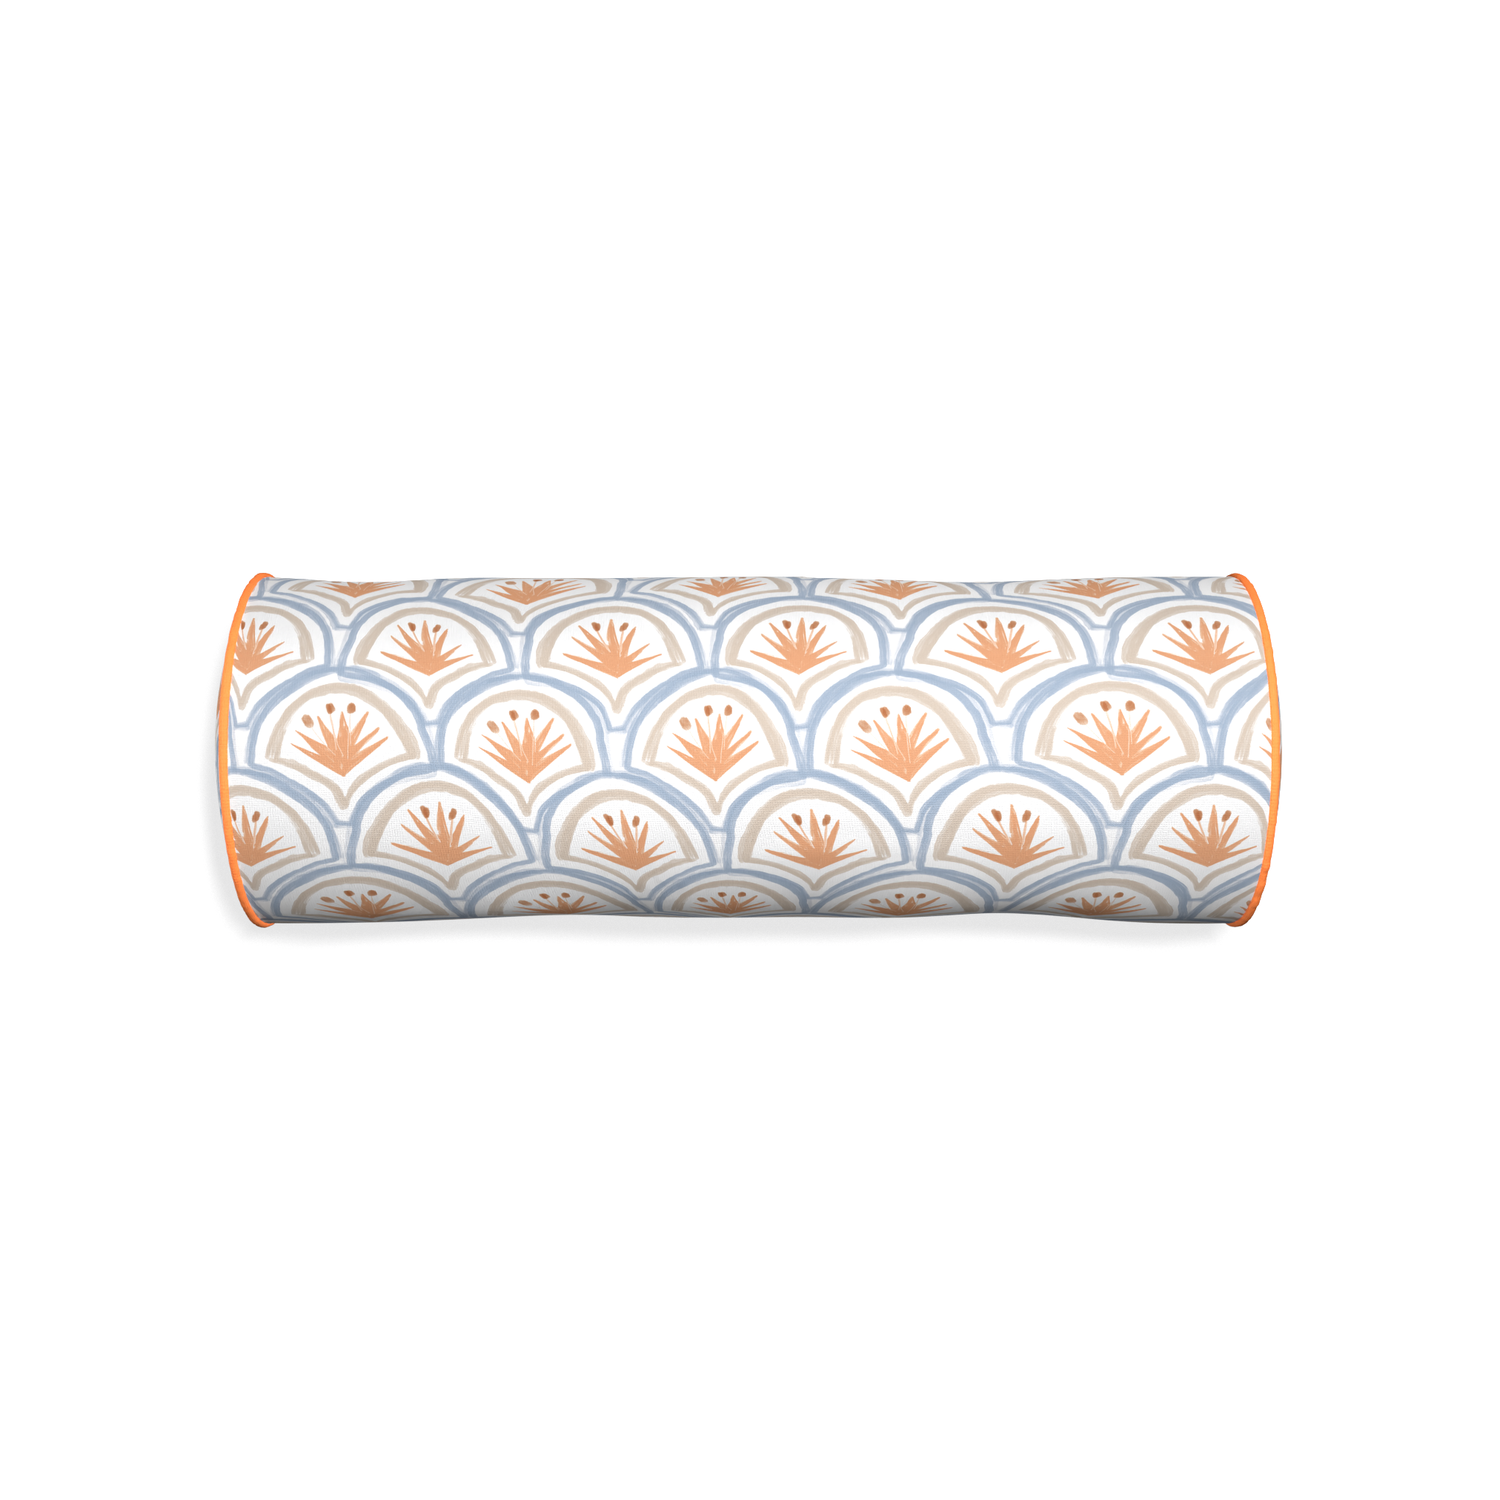 Bolster thatcher apricot custom art deco palm patternpillow with clementine piping on white background